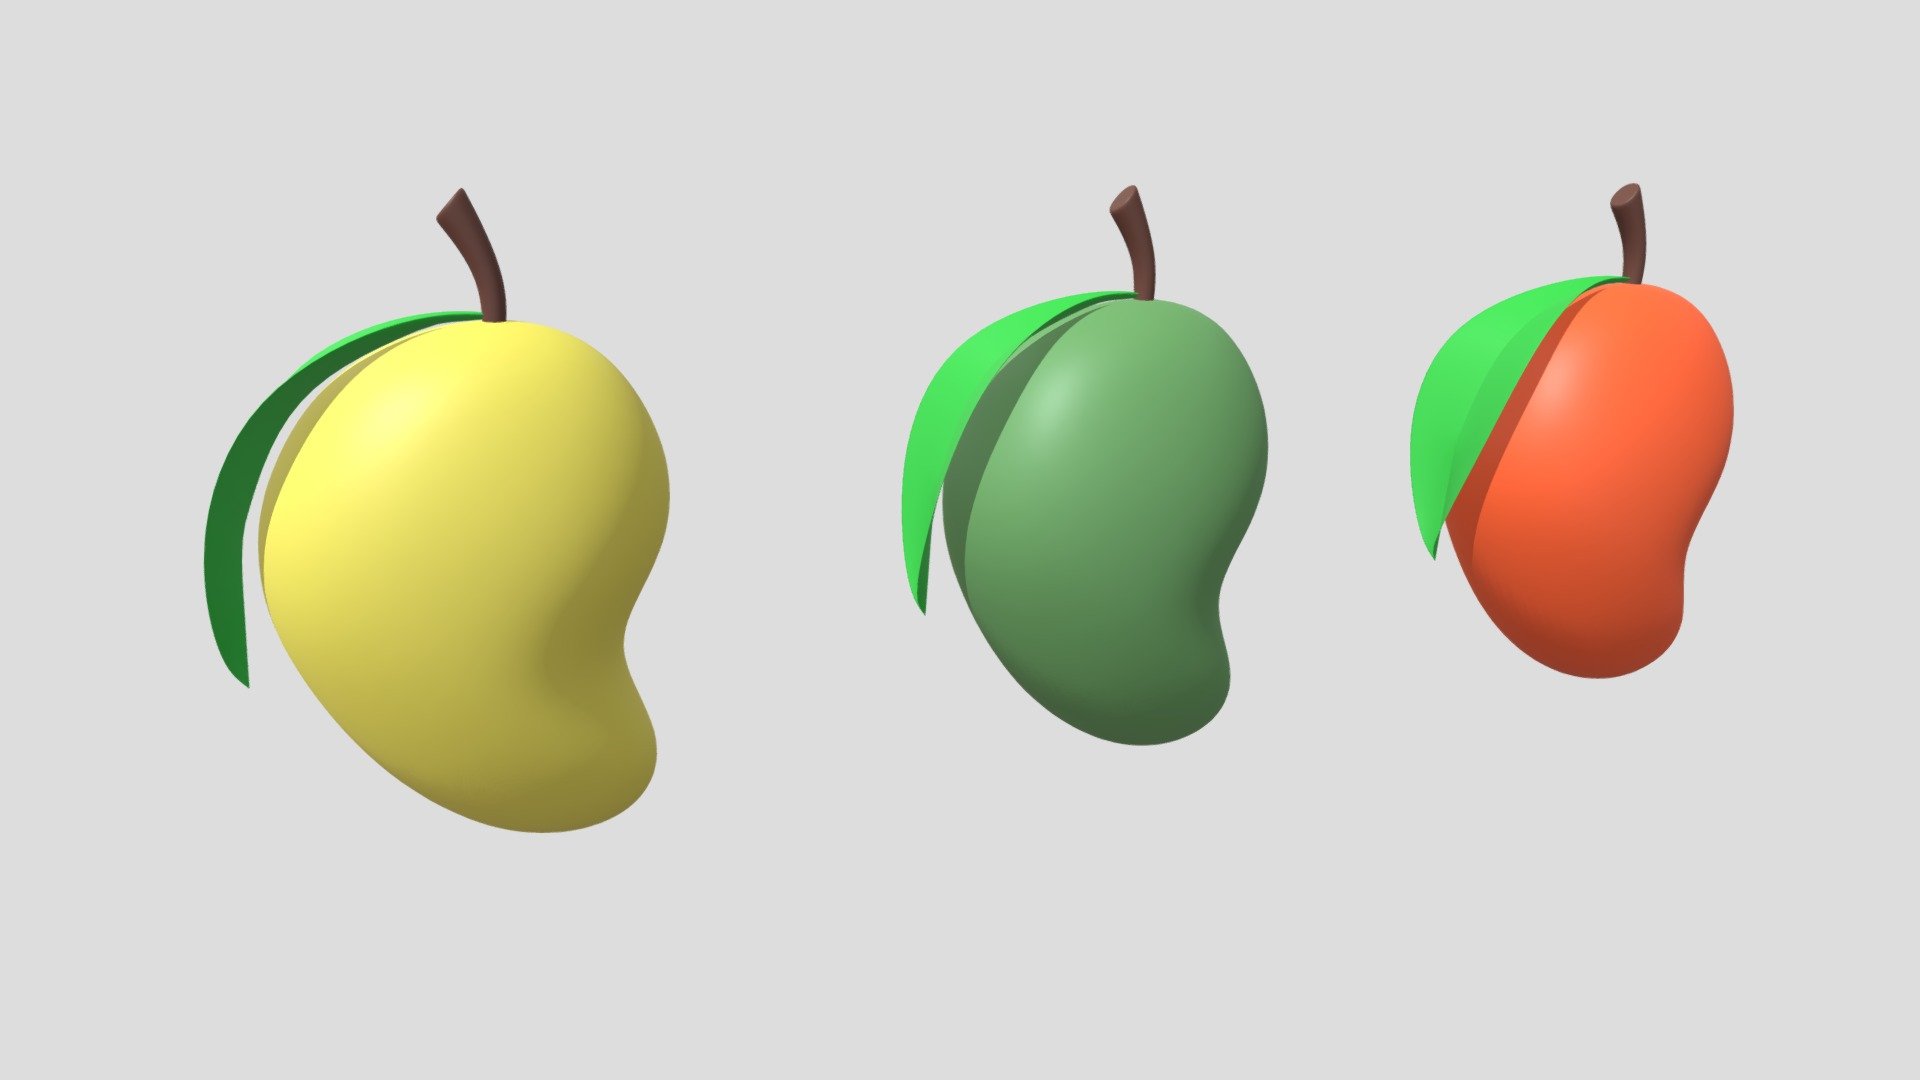 -Cartoon Cute Mango Fruit.

-1 Mango contains 3 objects.

-1 Mango Vert : 6,614, Poly : 6,528.

-This product was created in Blender 2.8

-Formats: blend, fbx, obj, c4d, dae, abc, stl, glb,unitypackage.

-We hope you enjoy this model.

-Thank you 3d model